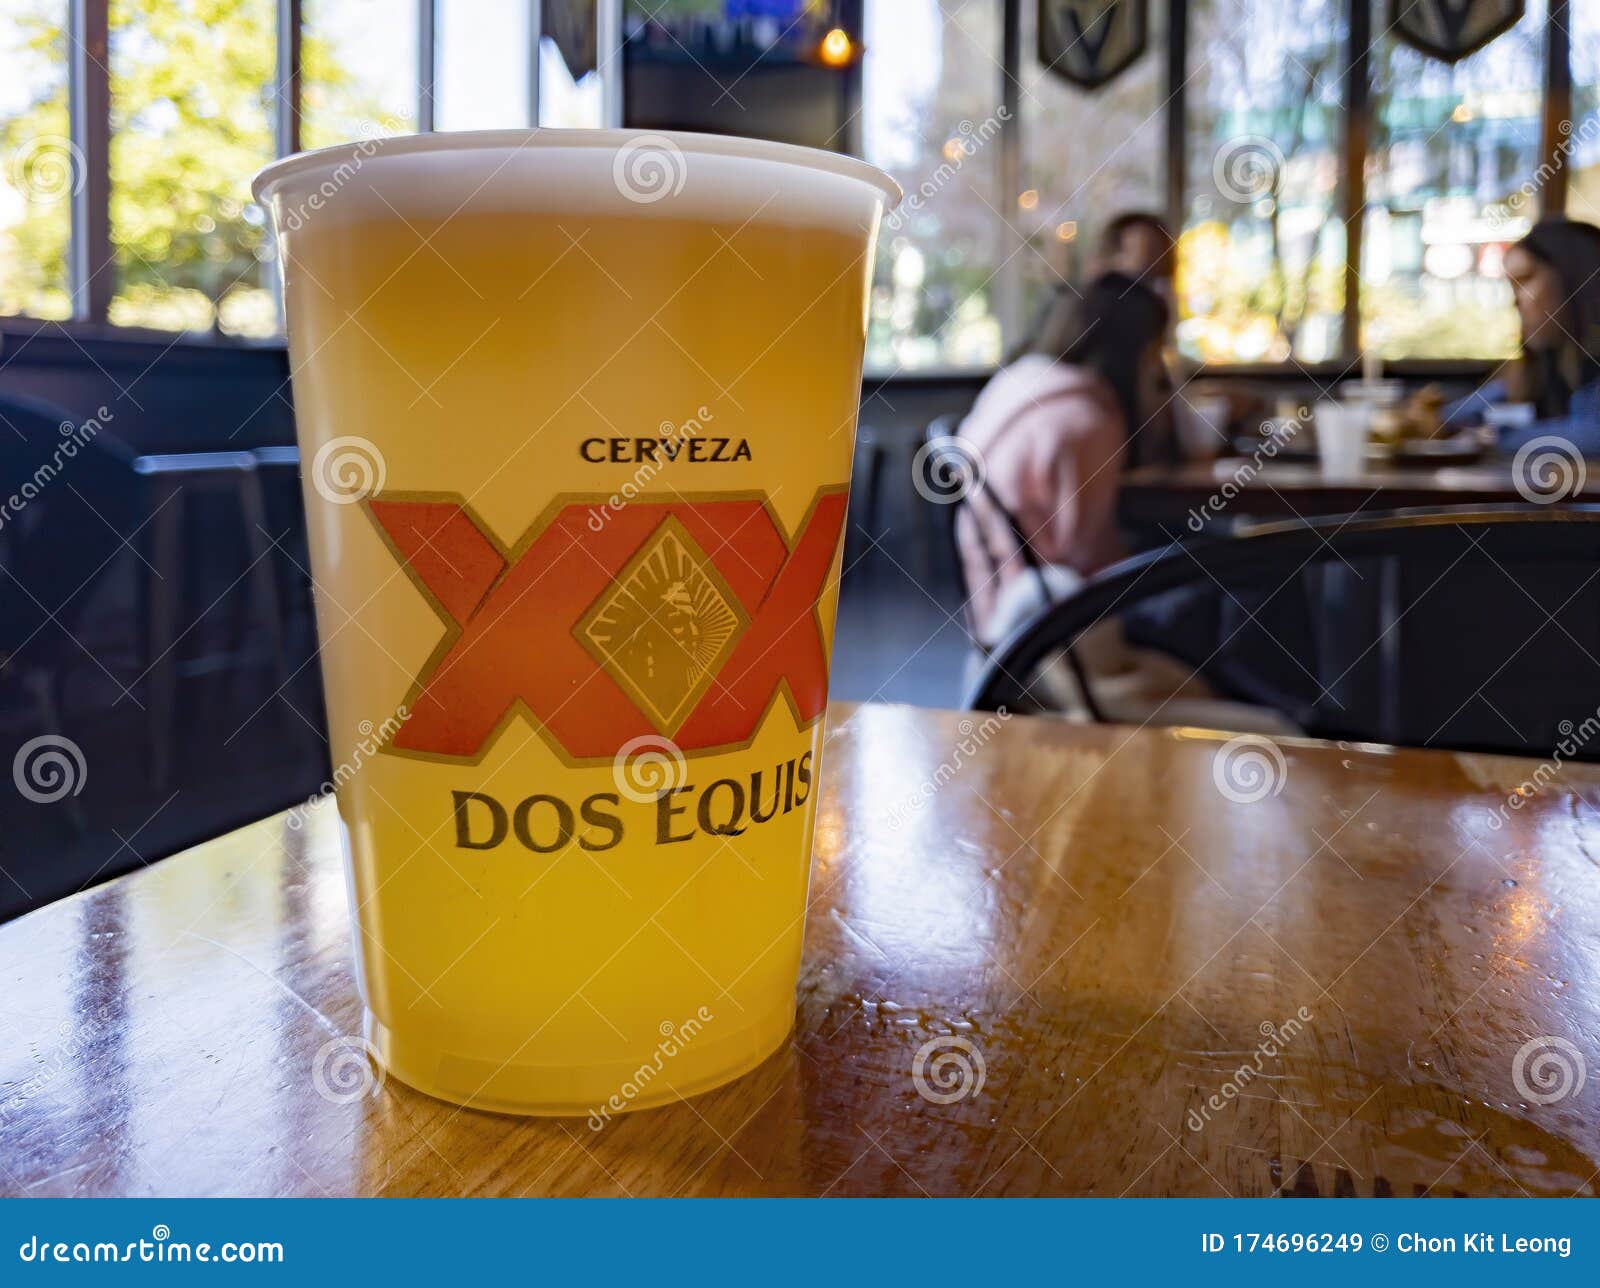 close-up-shot-of-a-cup-of-cold-dos-equis-lager-especial-mexican-beer